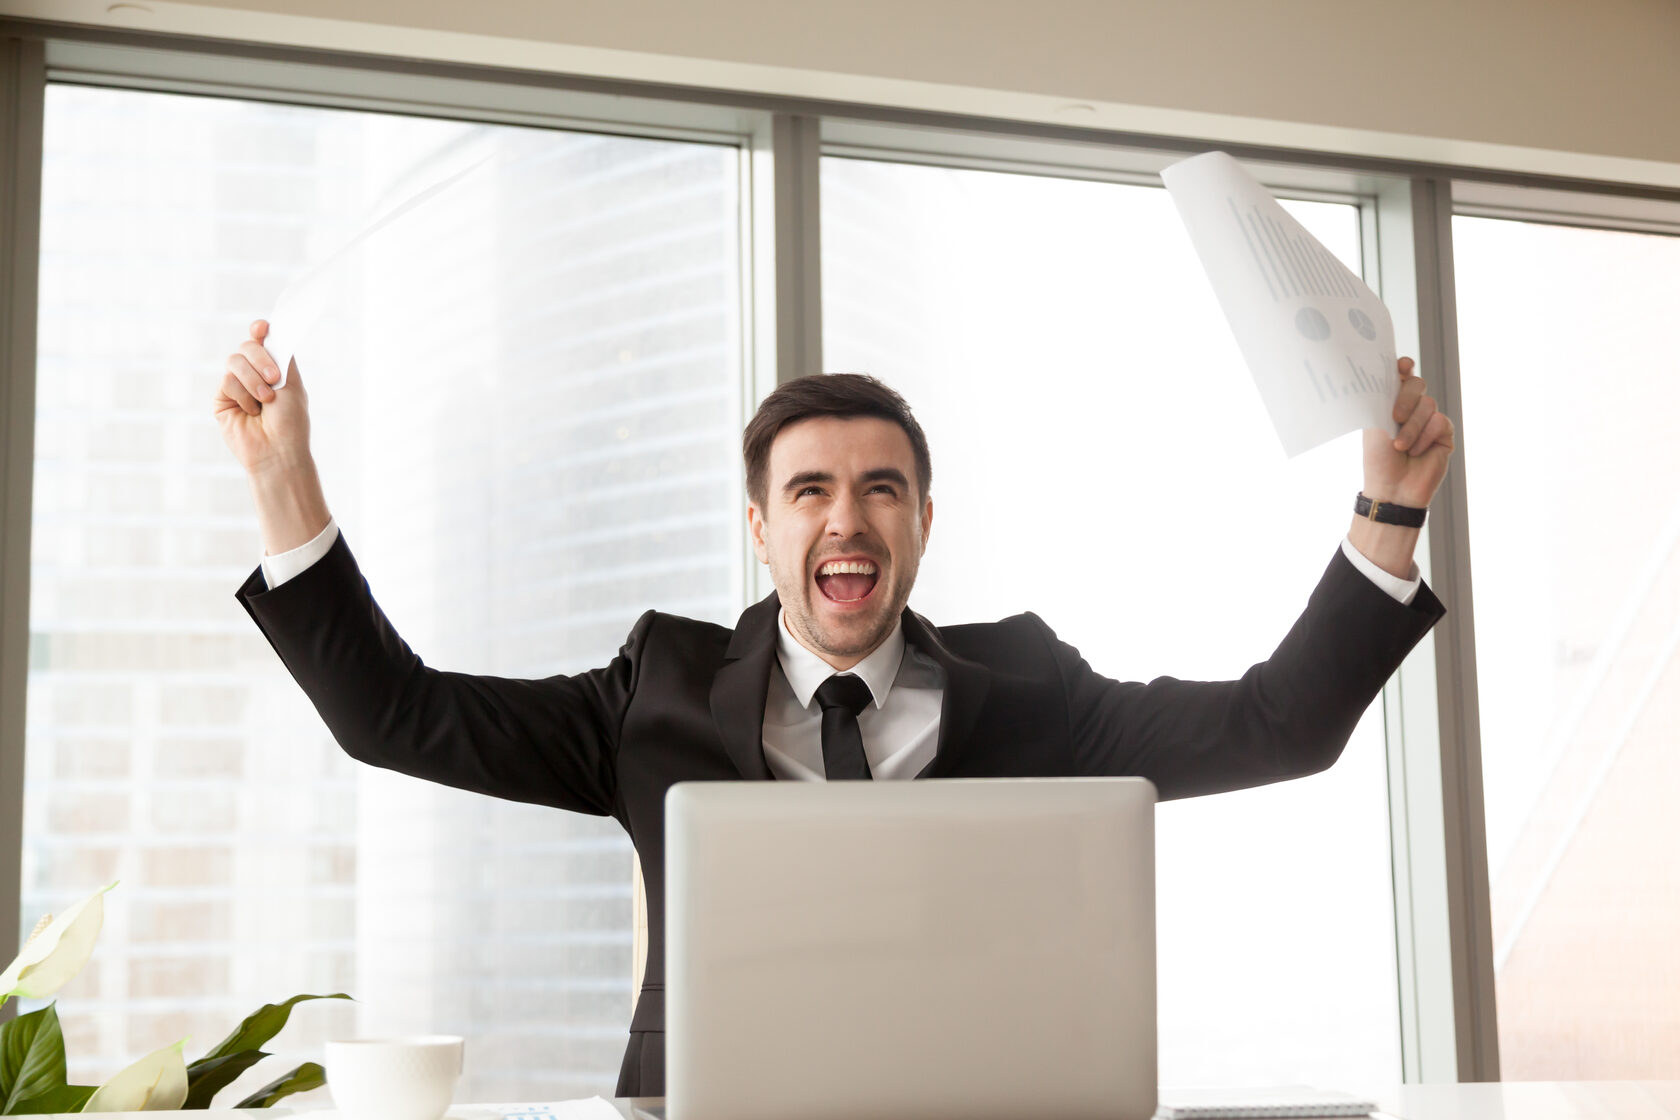 Overjoyed man in a business suit sitting at a desk with a laptop, triumphantly raising a document overhead, celebrating his new job offer.